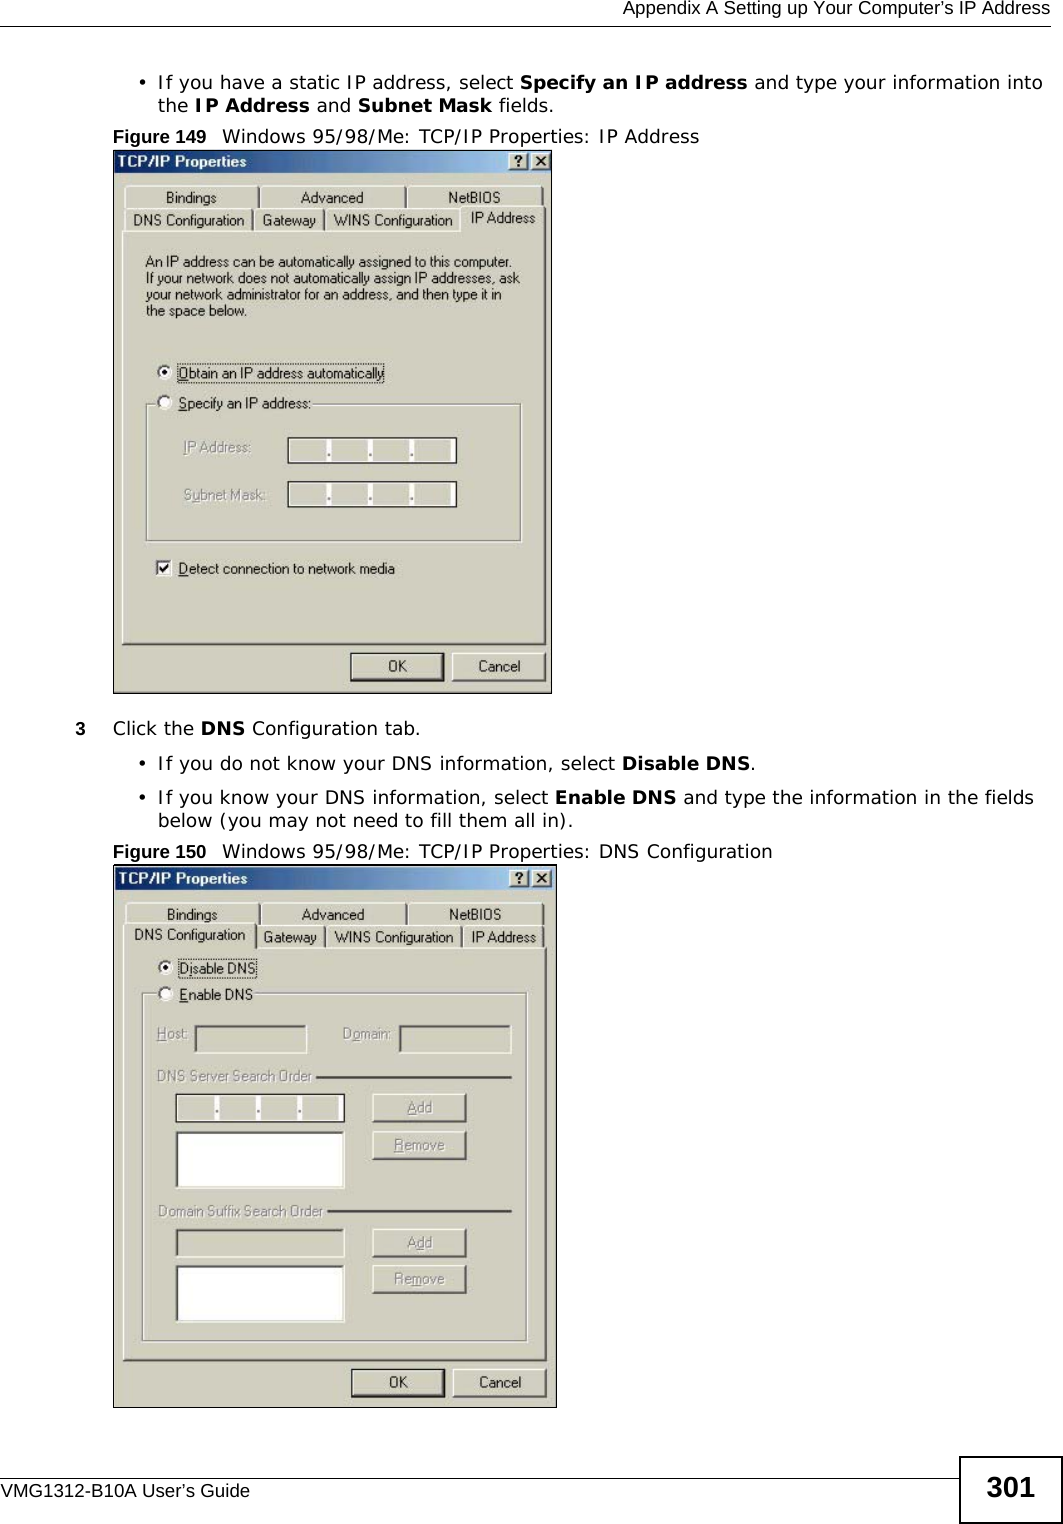  Appendix A Setting up Your Computer’s IP AddressVMG1312-B10A User’s Guide 301• If you have a static IP address, select Specify an IP address and type your information into the IP Address and Subnet Mask fields.Figure 149   Windows 95/98/Me: TCP/IP Properties: IP Address3Click the DNS Configuration tab.• If you do not know your DNS information, select Disable DNS.• If you know your DNS information, select Enable DNS and type the information in the fields below (you may not need to fill them all in).Figure 150   Windows 95/98/Me: TCP/IP Properties: DNS Configuration